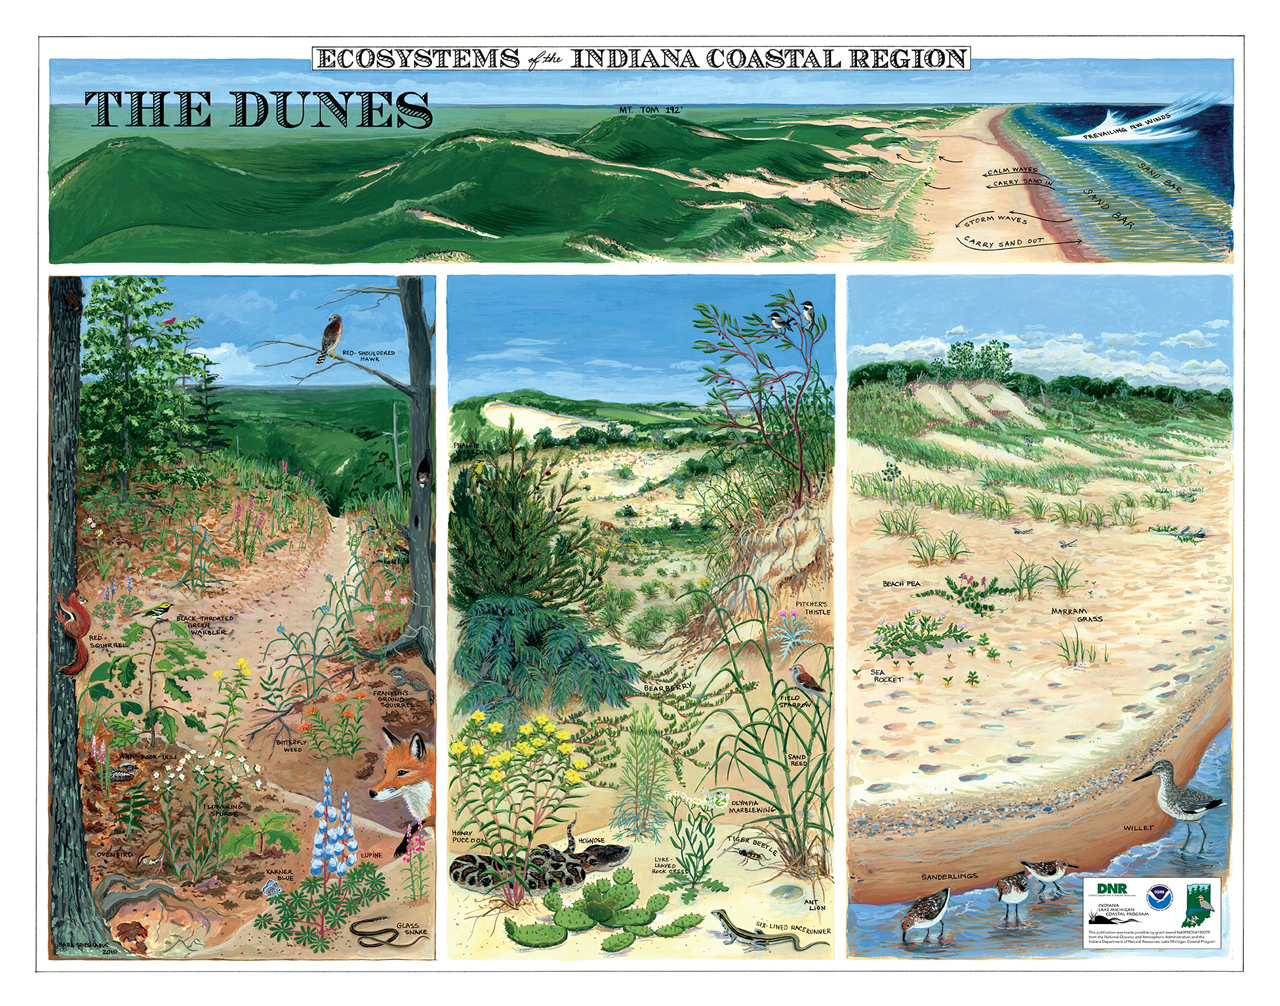 Image of sand dunes, and related plants and animal species, with the words “The Dunes” and “Ecosystems of the Indiana Coastal Region”